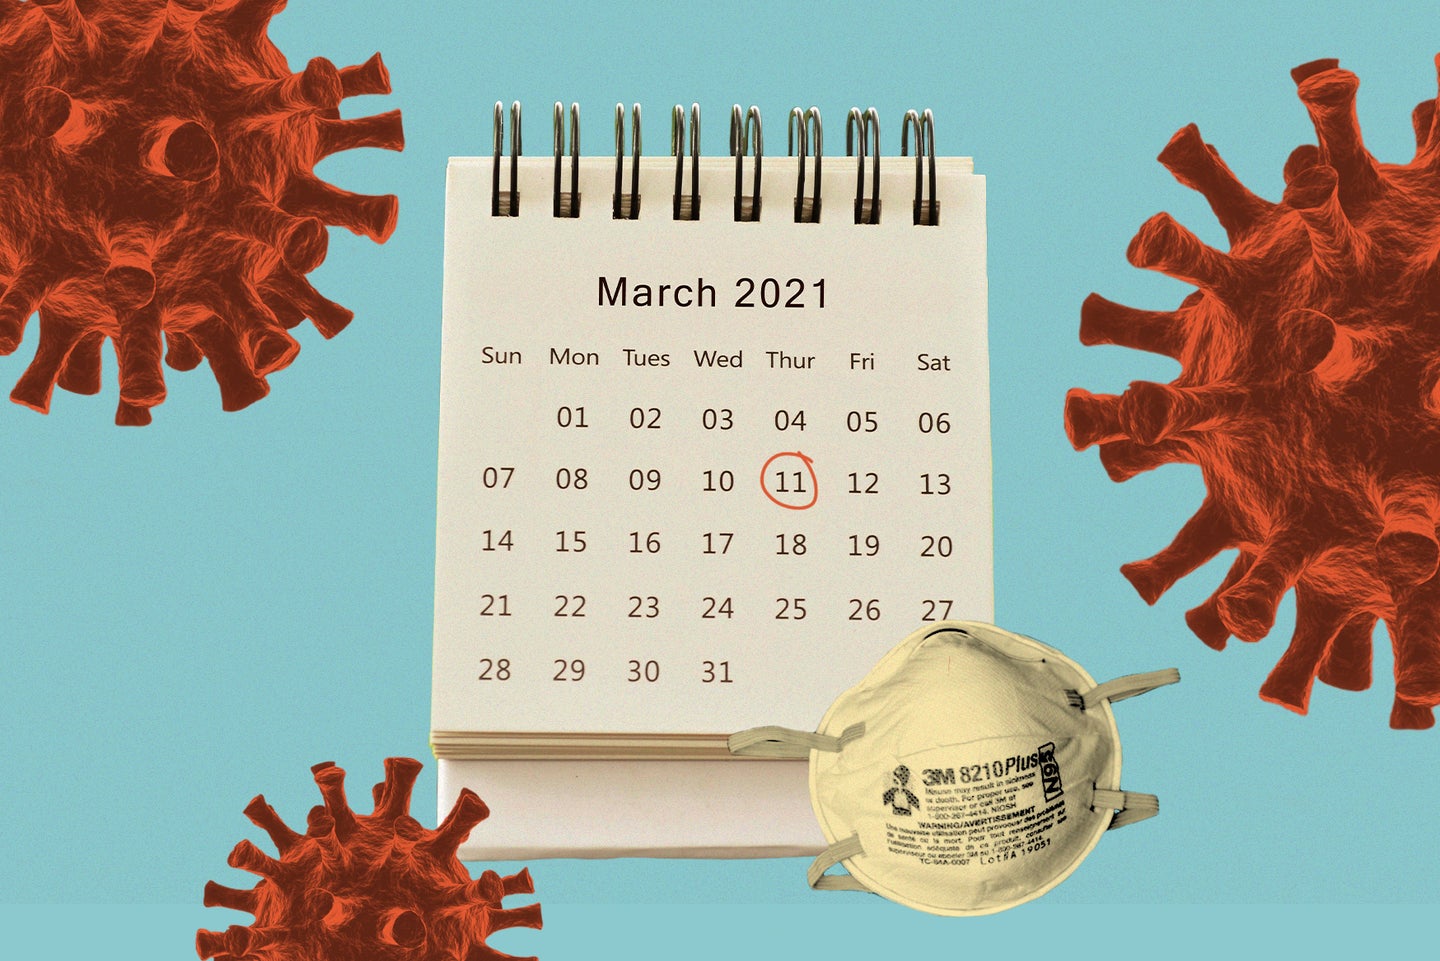 A calendar with the page for March 2021 displayed and a red circle around Thursday the 11th sits next to an N95 mask on a blue background surrounded by red illustrations of the coronavirus.